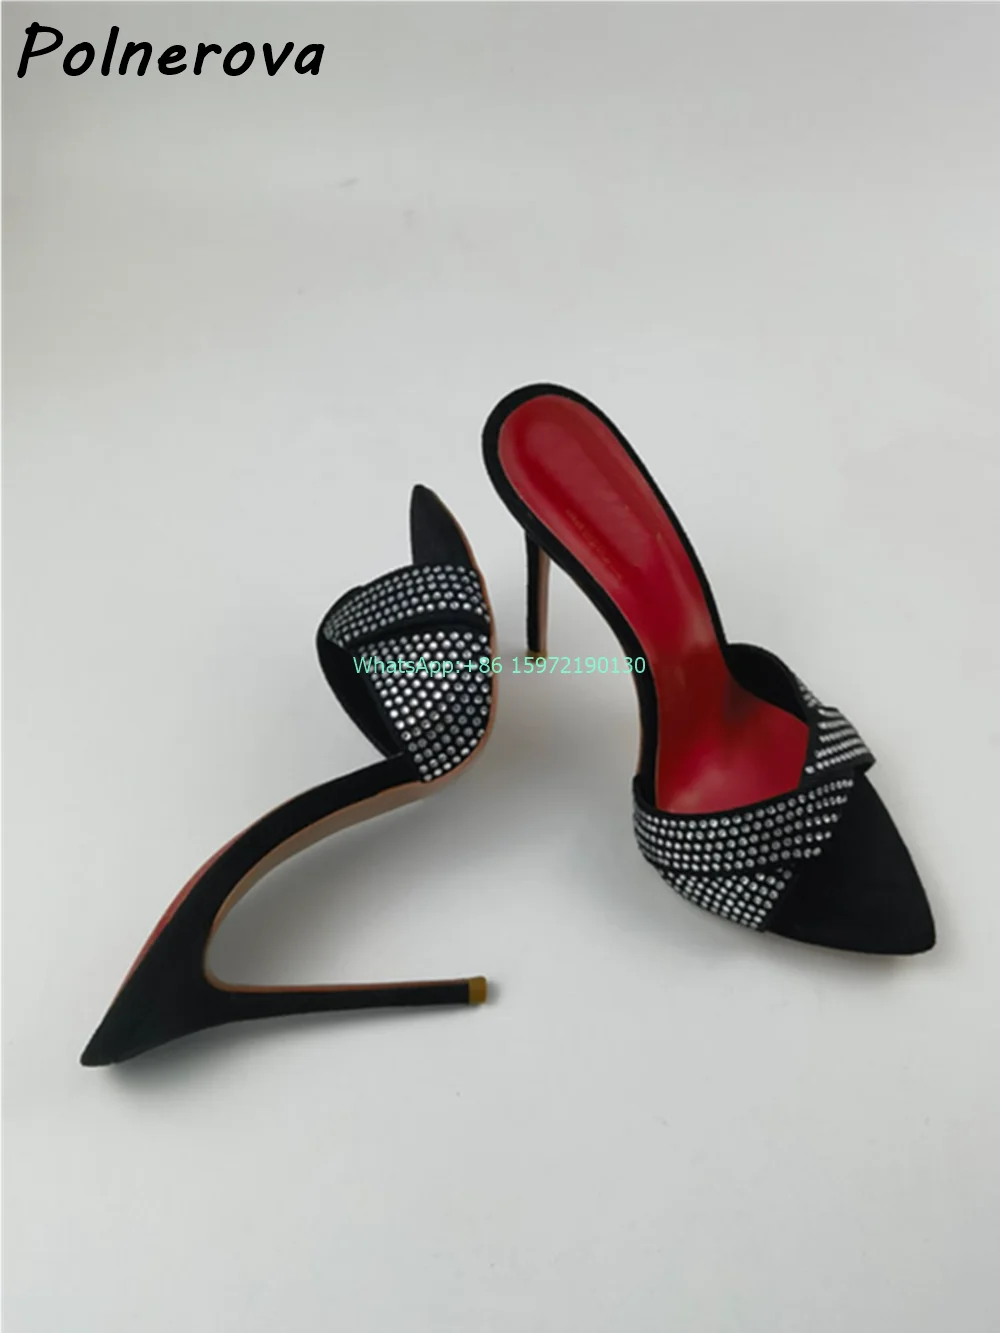 

Crystal Black Red Slippers Pointy Toe High Heels Slip On Sandals Summer Shiny Runway Sexy Fashion Ladies Stiletto Shoes